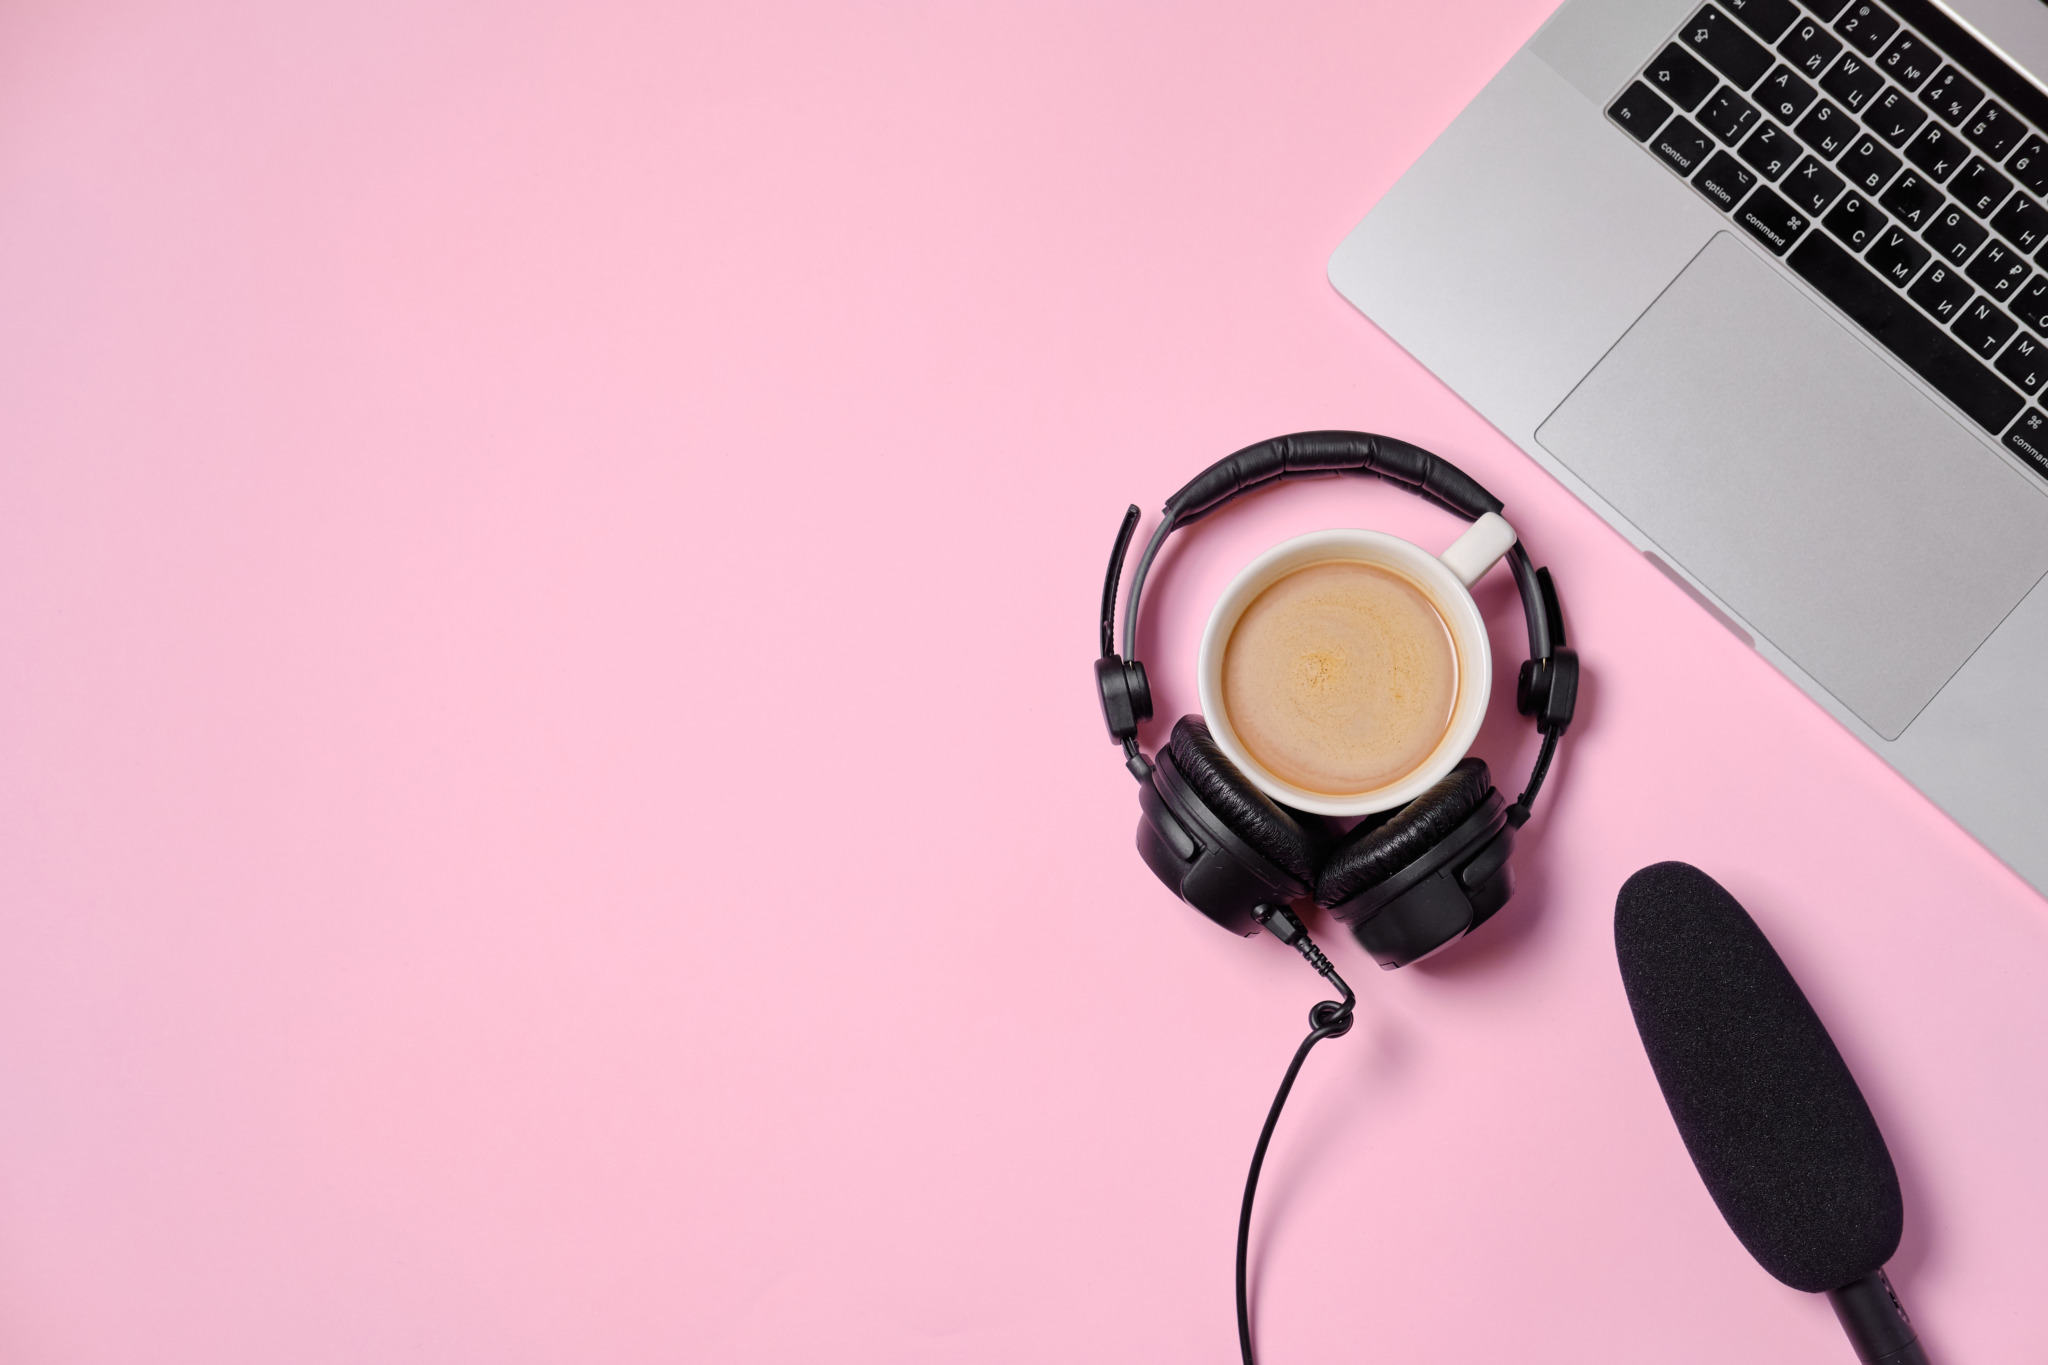 Music,Or,Podcast,Background,With,Headphones,,Microphone,,Coffee,And,Laptop